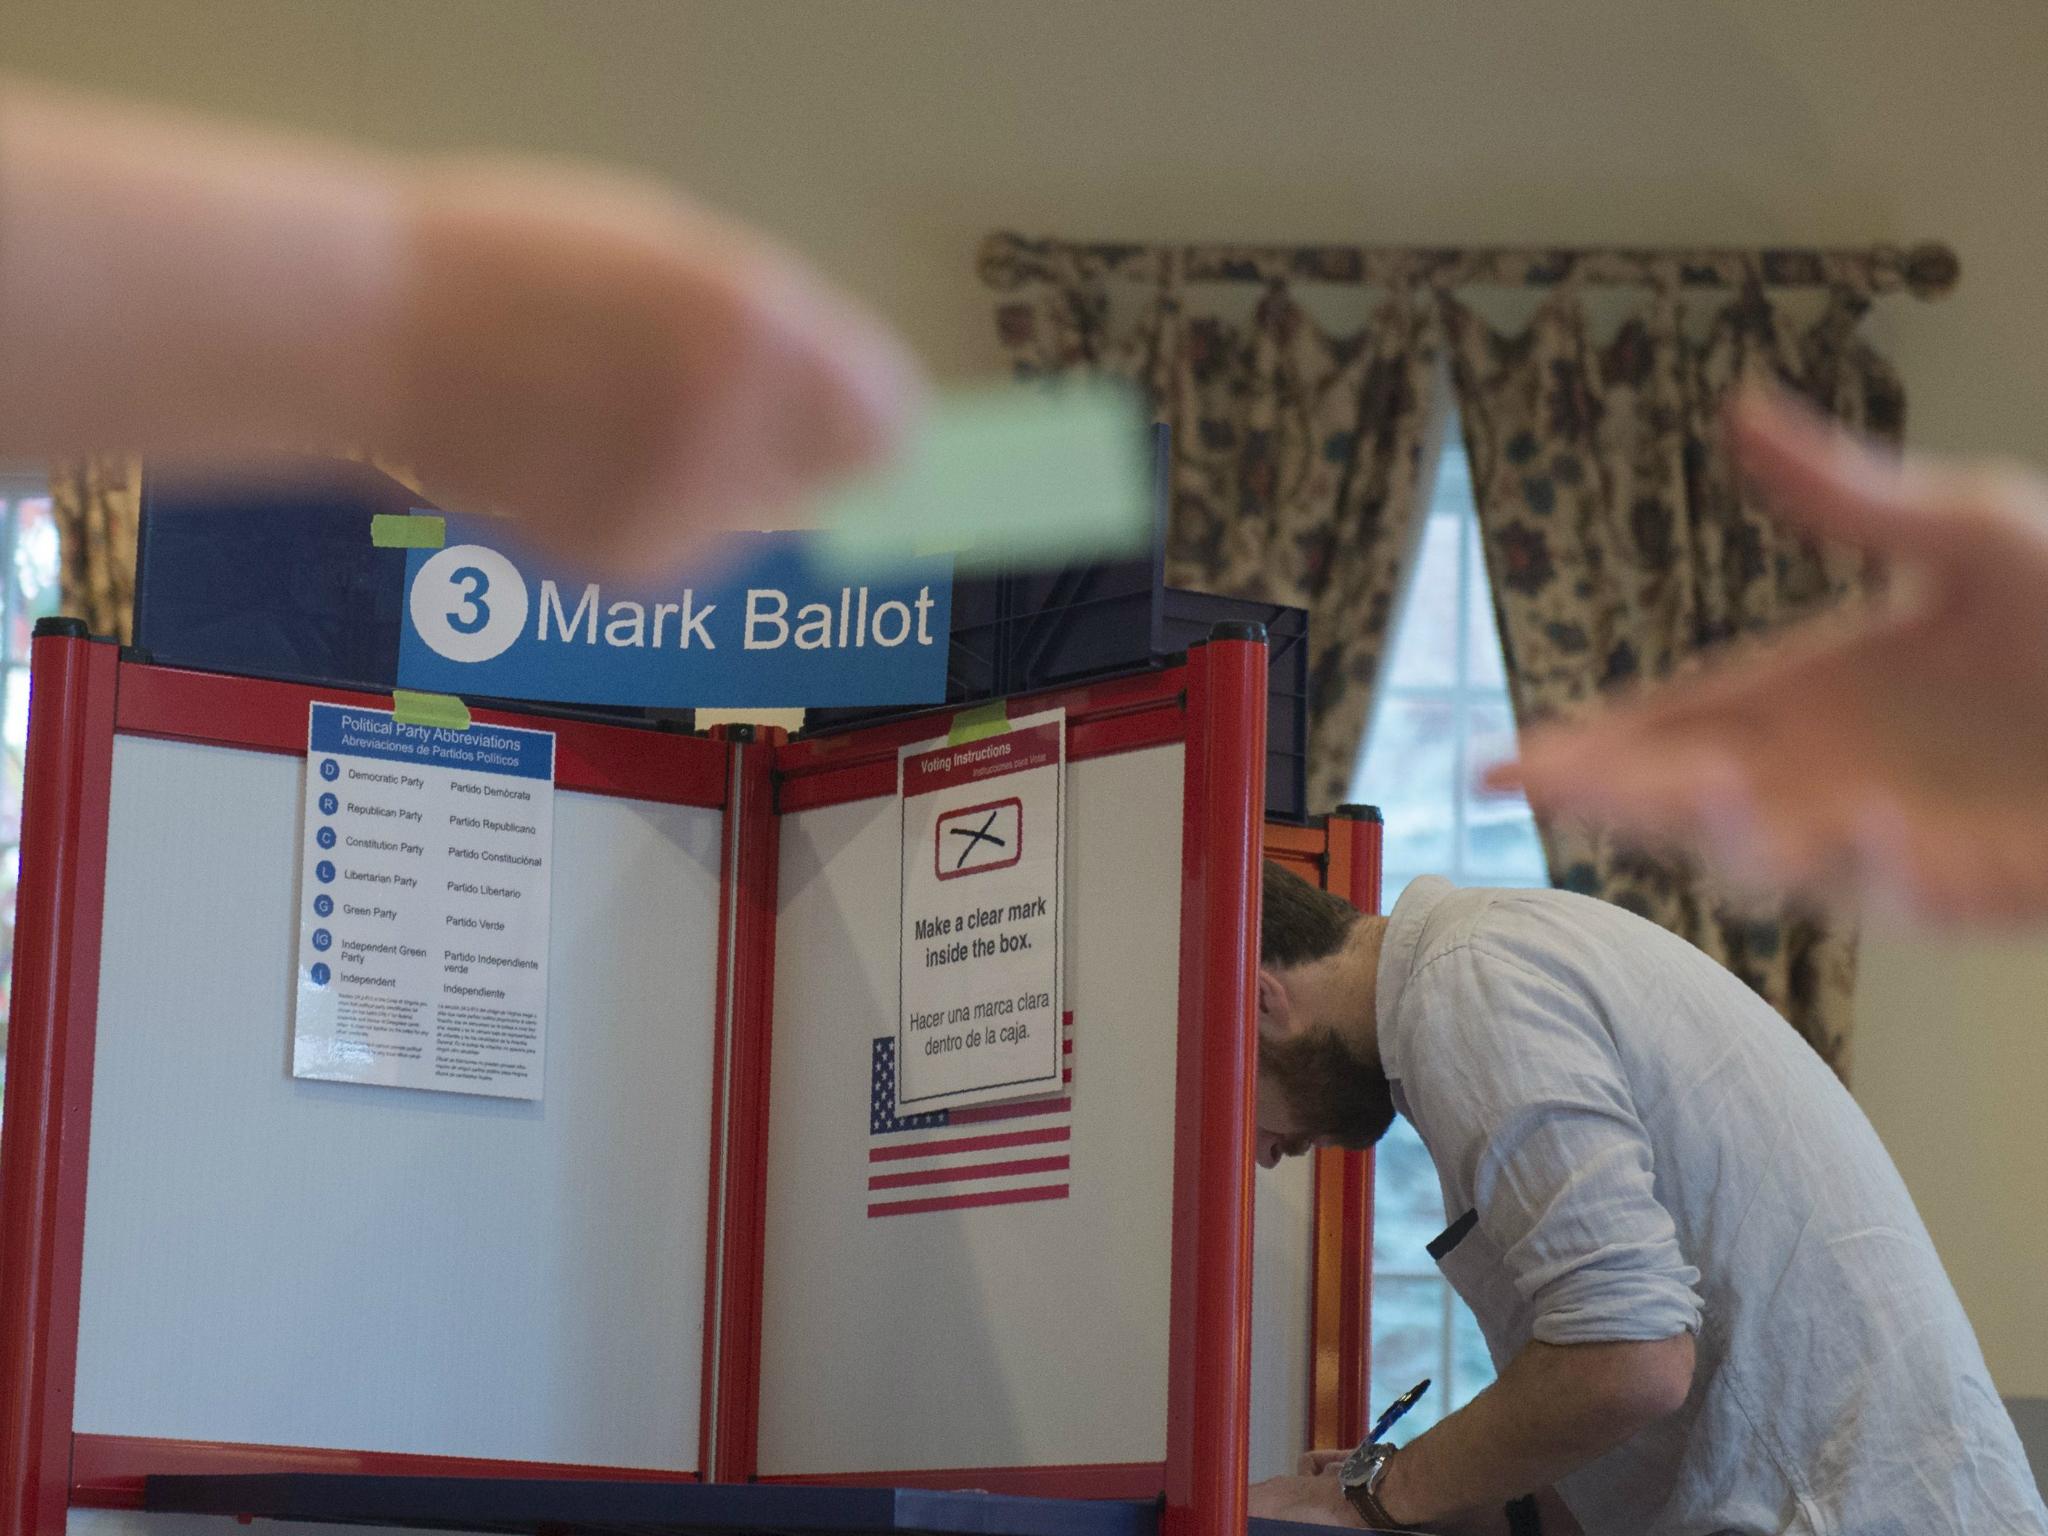 A voter hands over a card to get a ballot as someone votes in the background at a polling station in Arlington, Virginia on 7 November 2017.